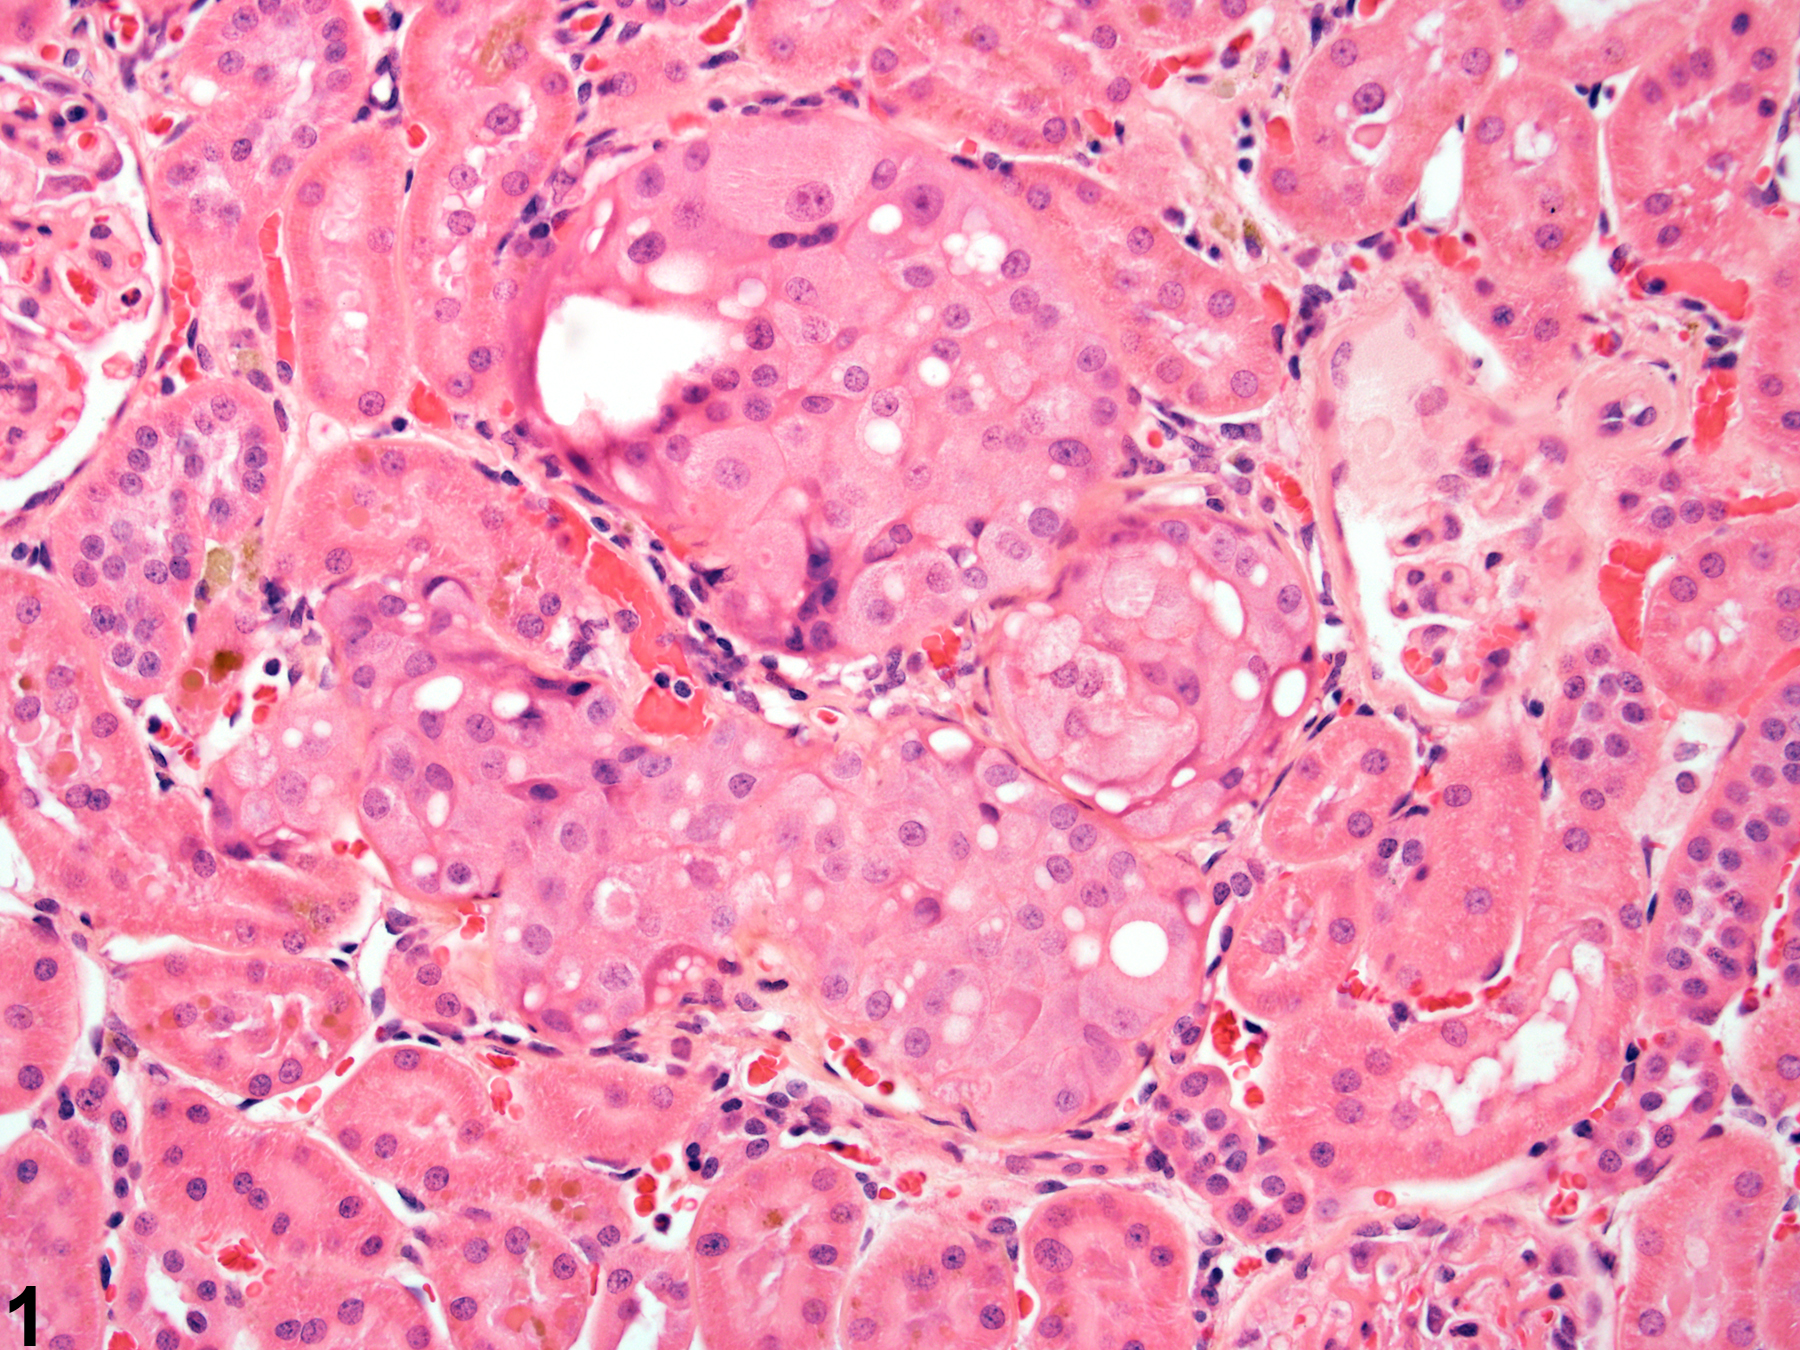 Image of renal tubule hyperplasia, amphophilic-vacuolar in the kidney from a female F344/N rat in a chronic study